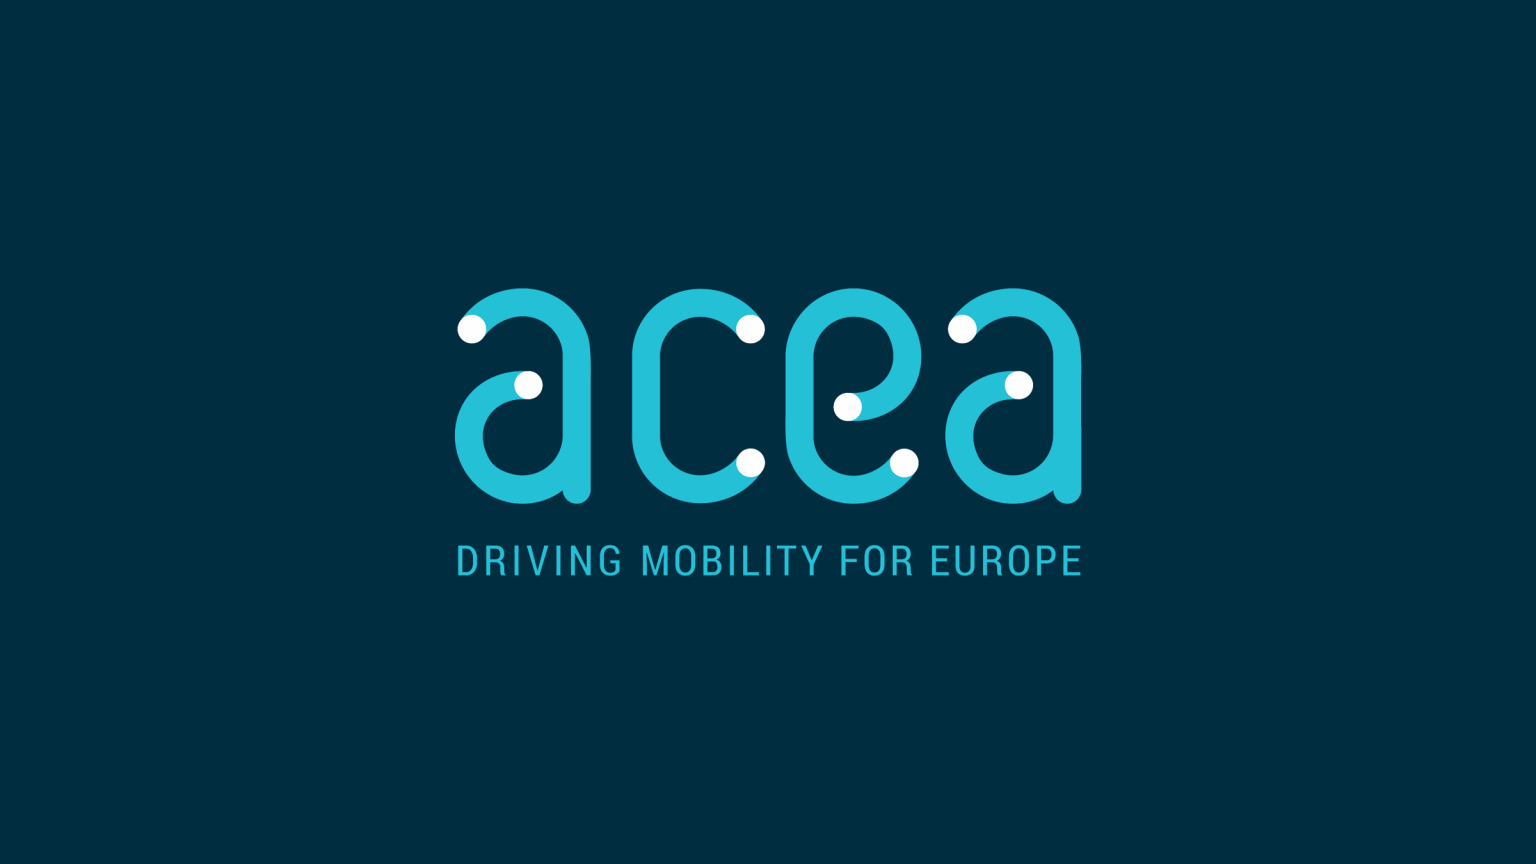 Europe Witnesses Surge In Electric Car Adoption By 50%: ACEA